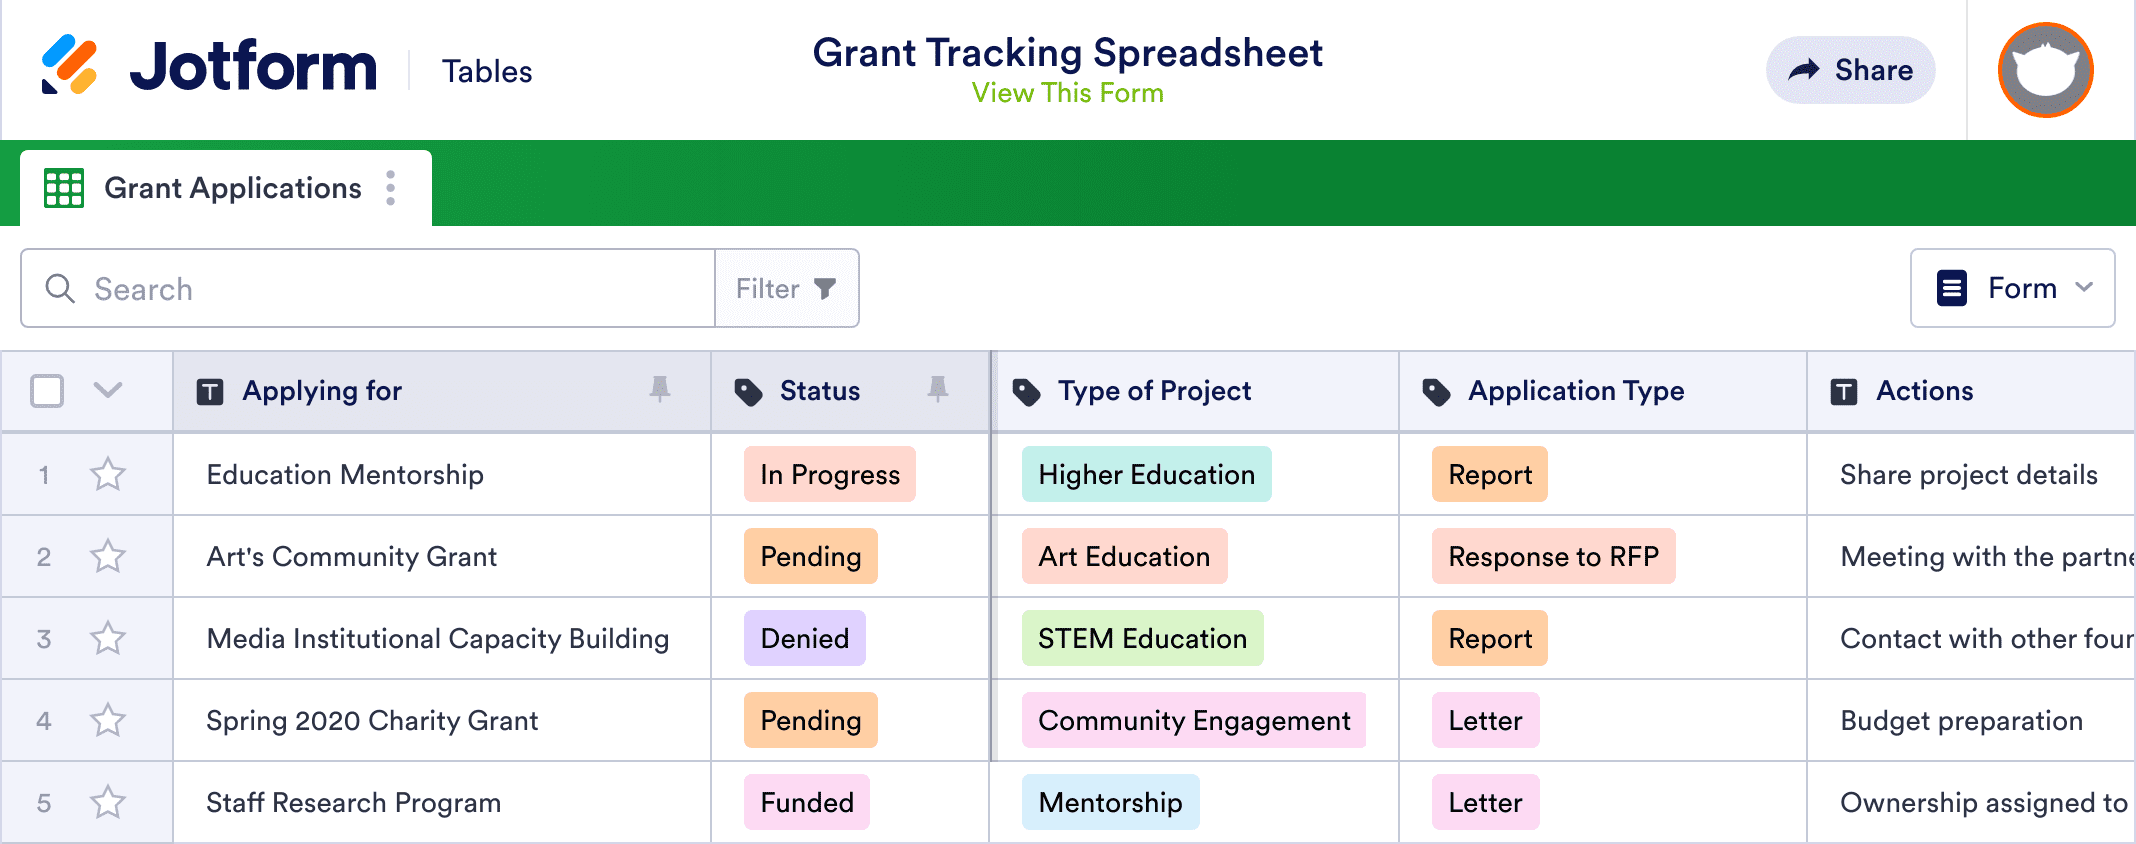 grant-tracking-sheet-template-jotform-tables